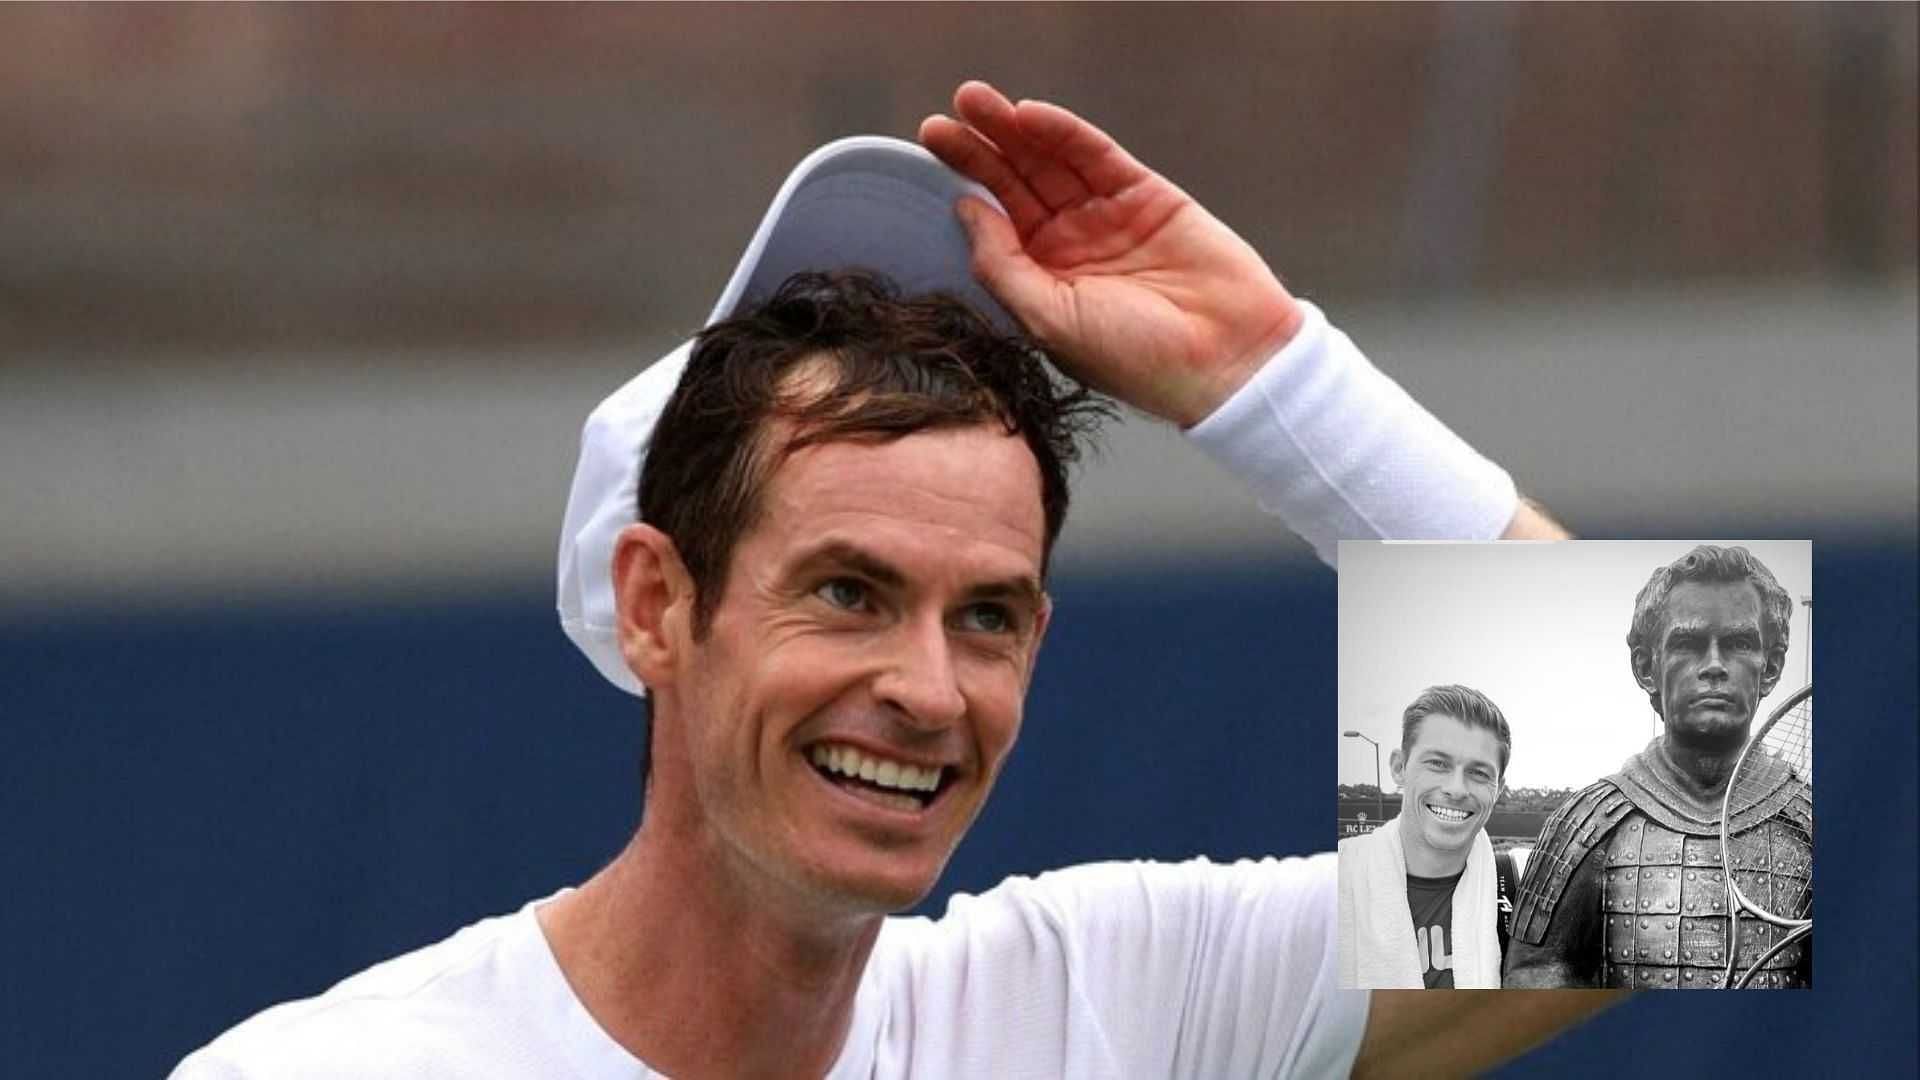 Andy Murray reacts to Neal Skupski photo